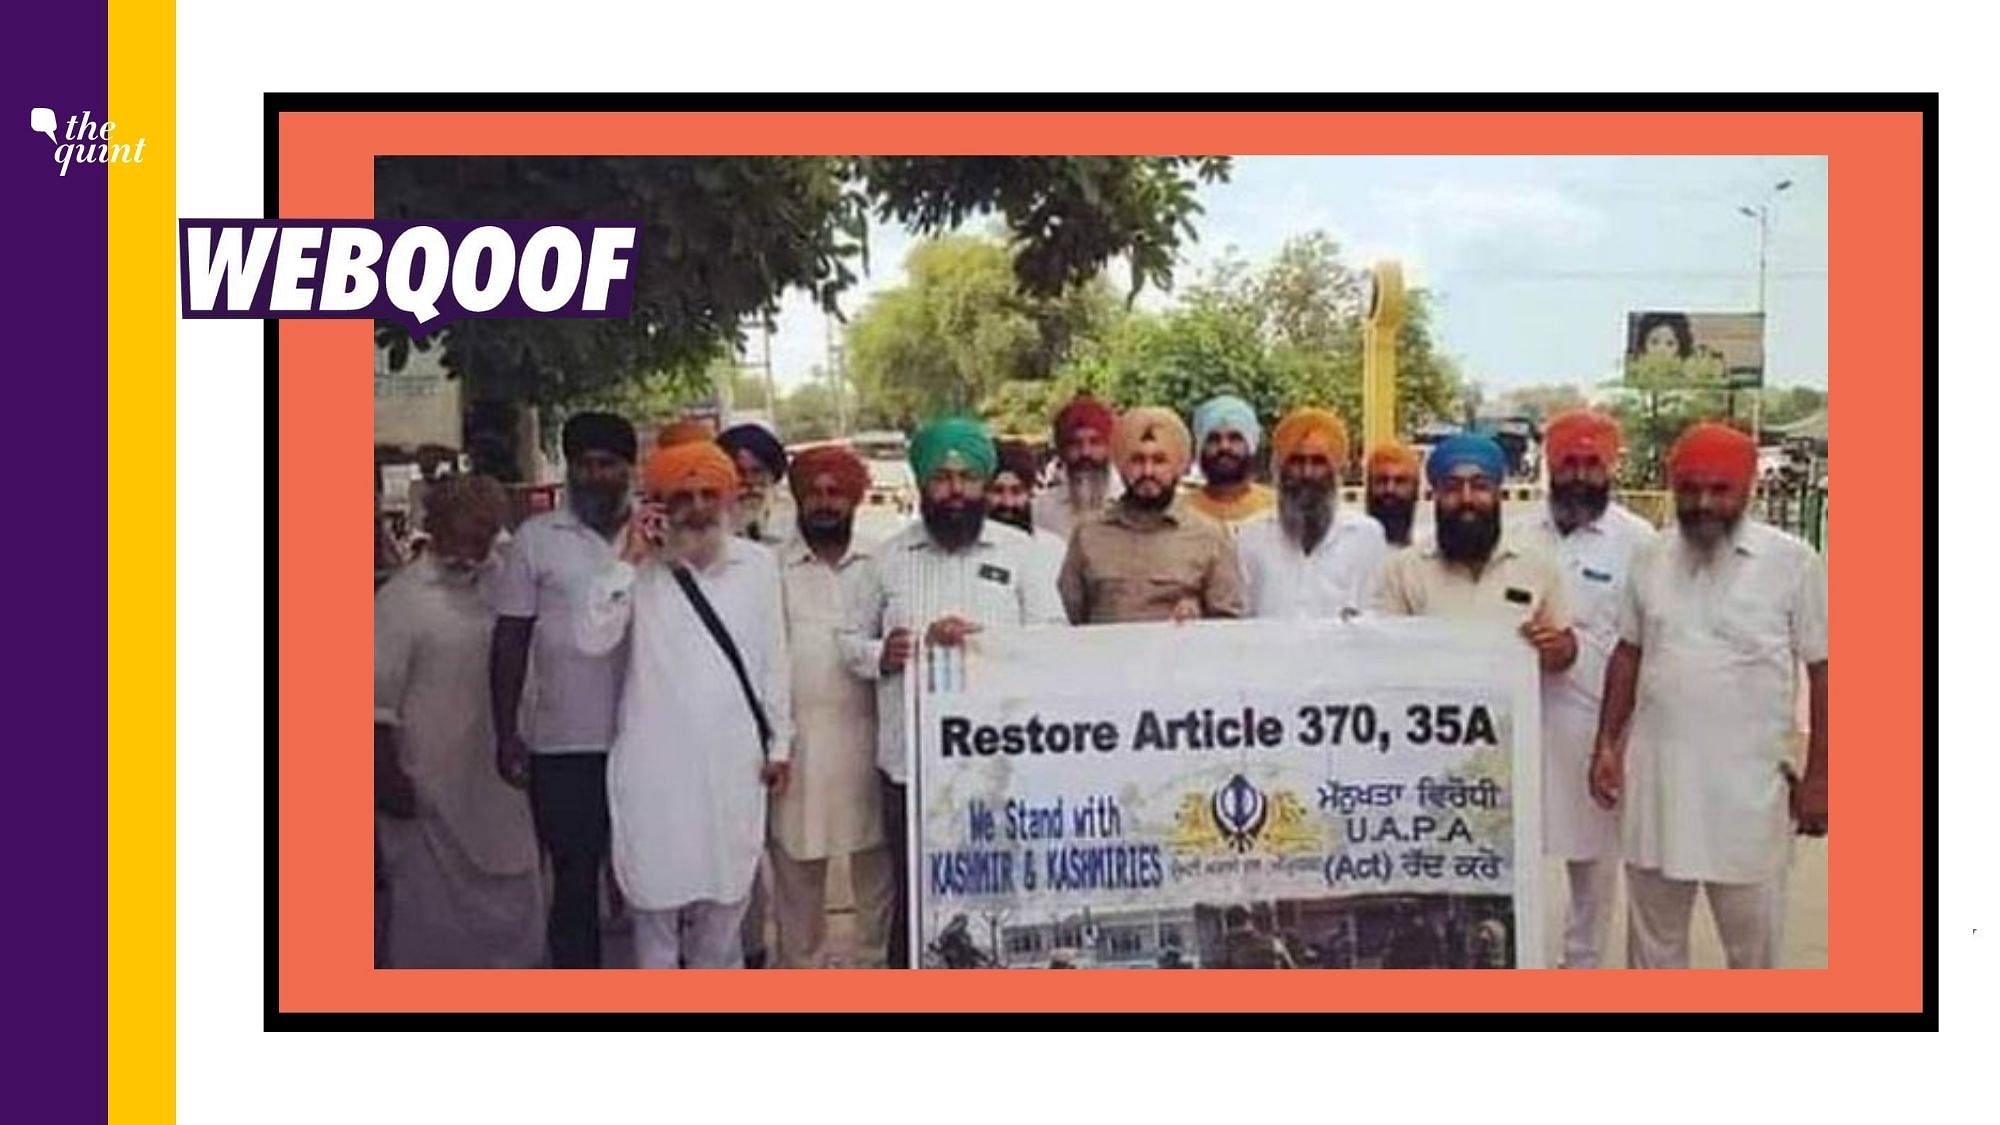 An old image of a protest against the abrogation of Article 370 has been revived to falsely claim that it is from the ongoing farmers’ protest.